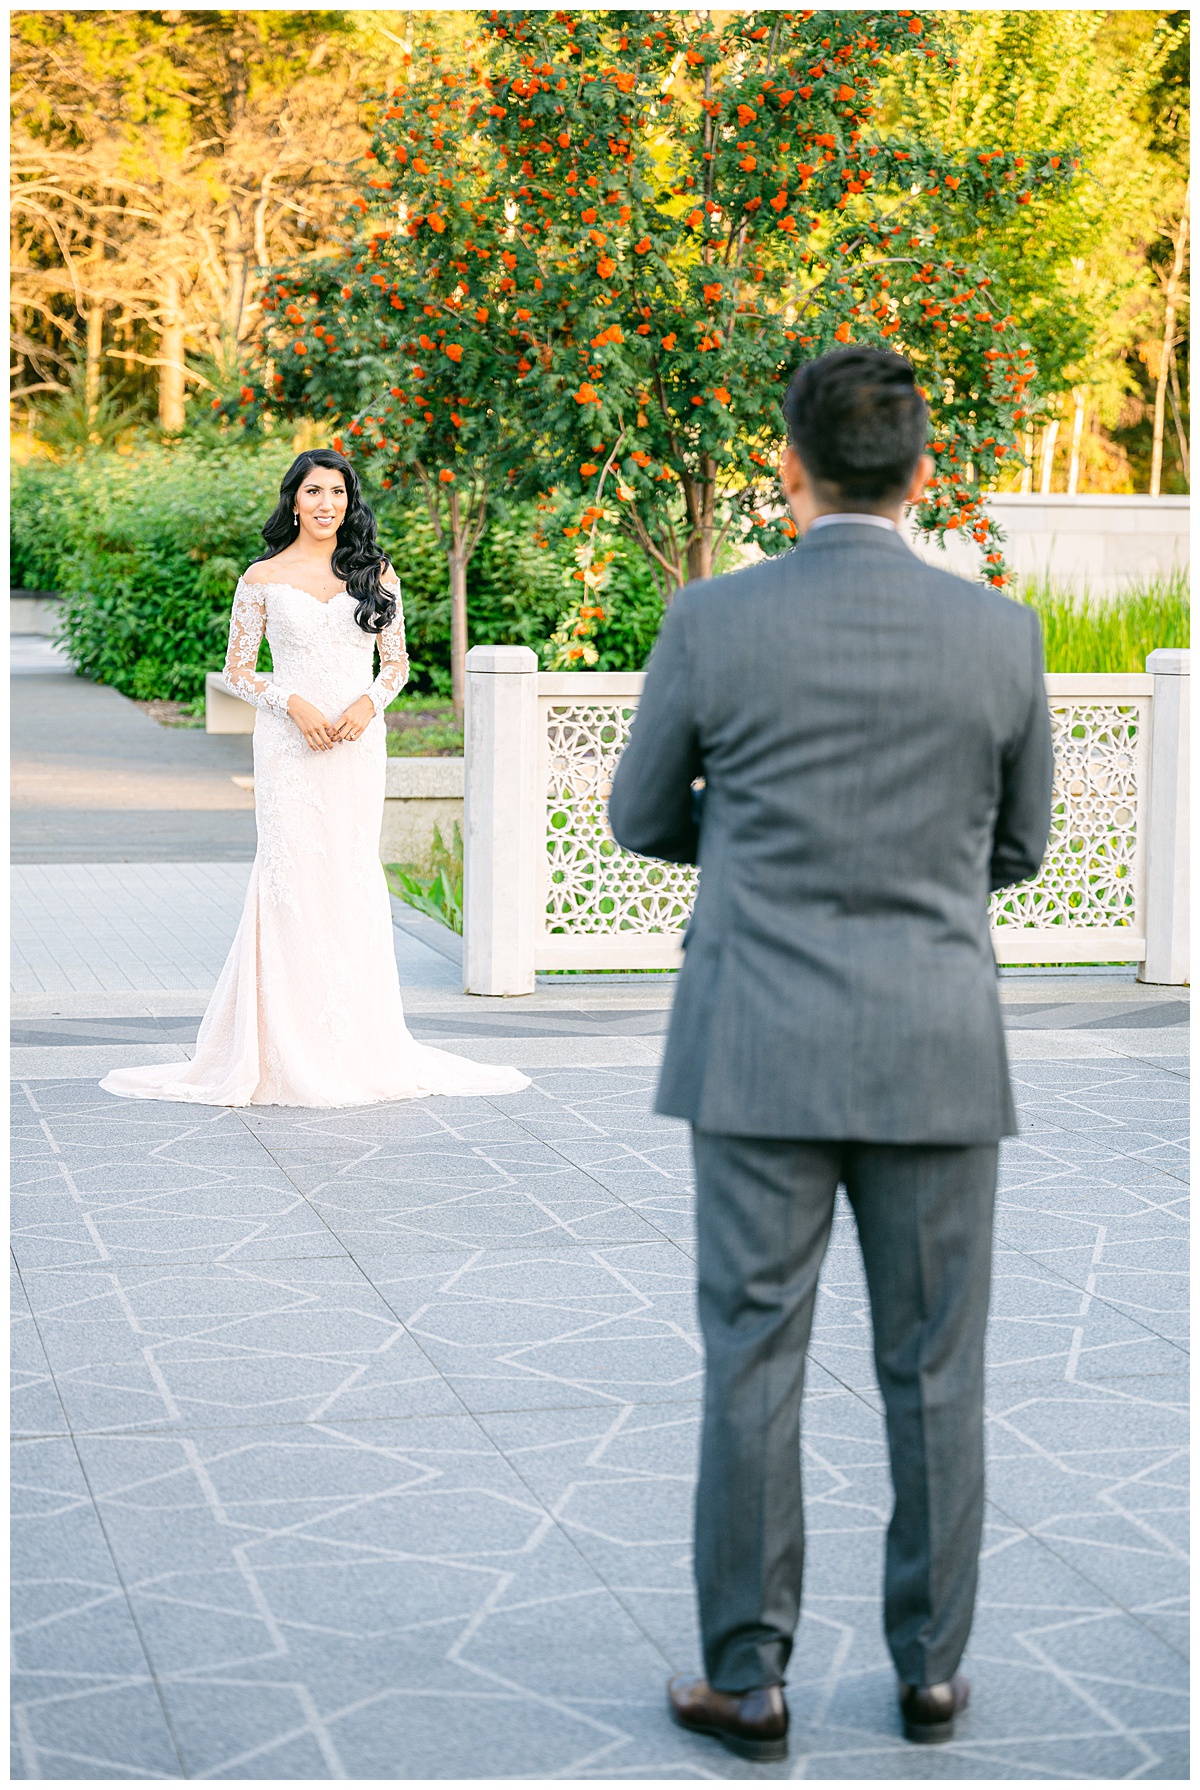 Bride and Groom doing their First Look in their wedding gown and tuxedo at the University of Alberta Botanic Gardens.